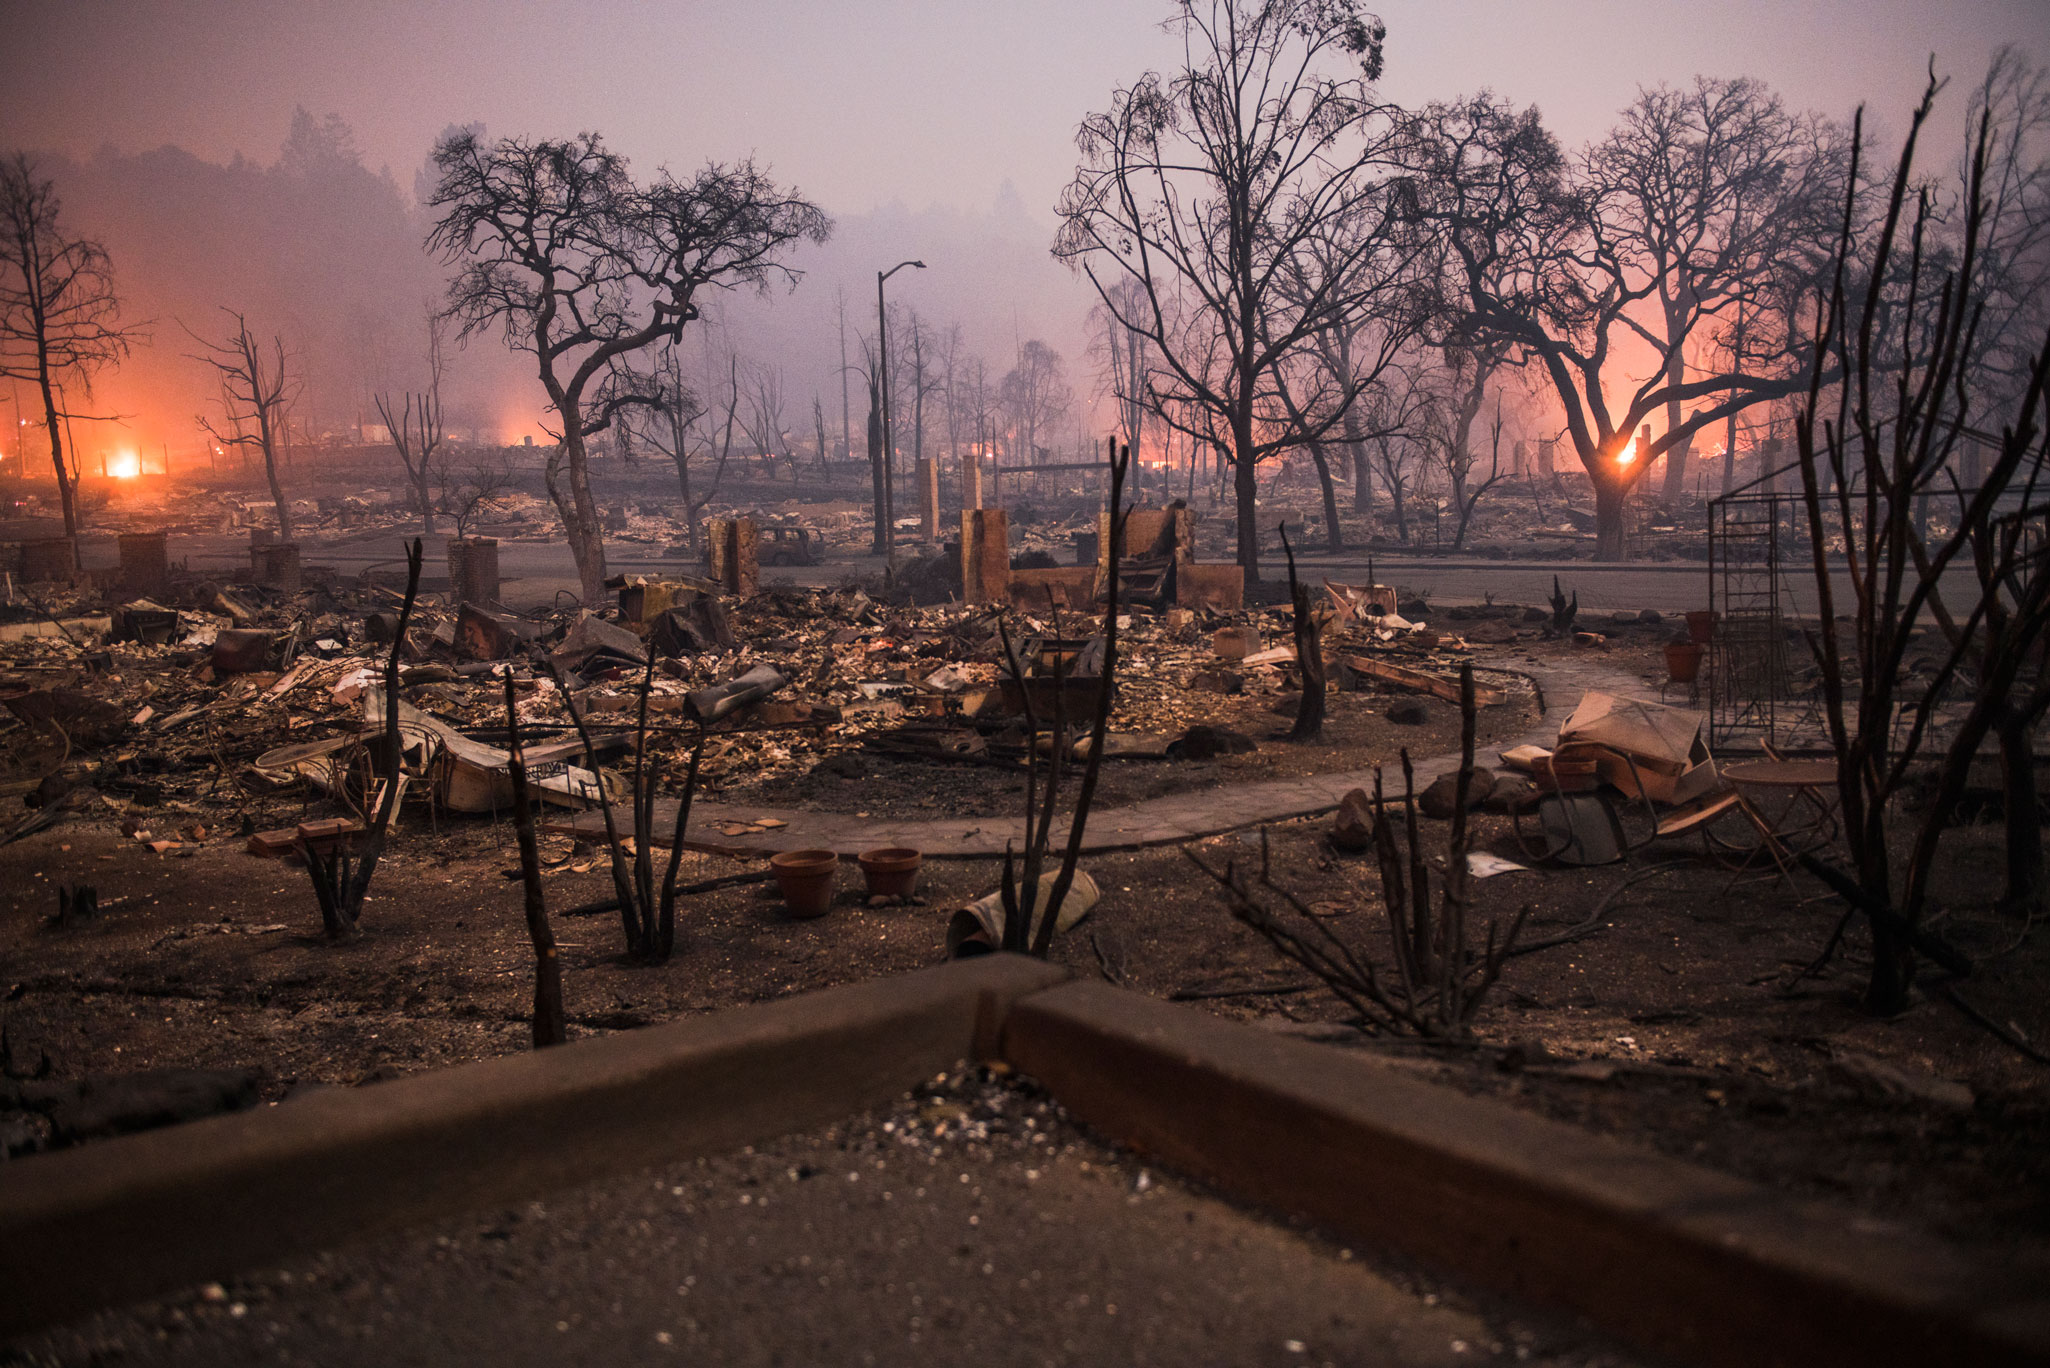 Santa Rosa, a city of 175,000 people in Sonoma County, saw widespread destruction as fires ravaged homes and businesses (Jeff Frost For TIME)